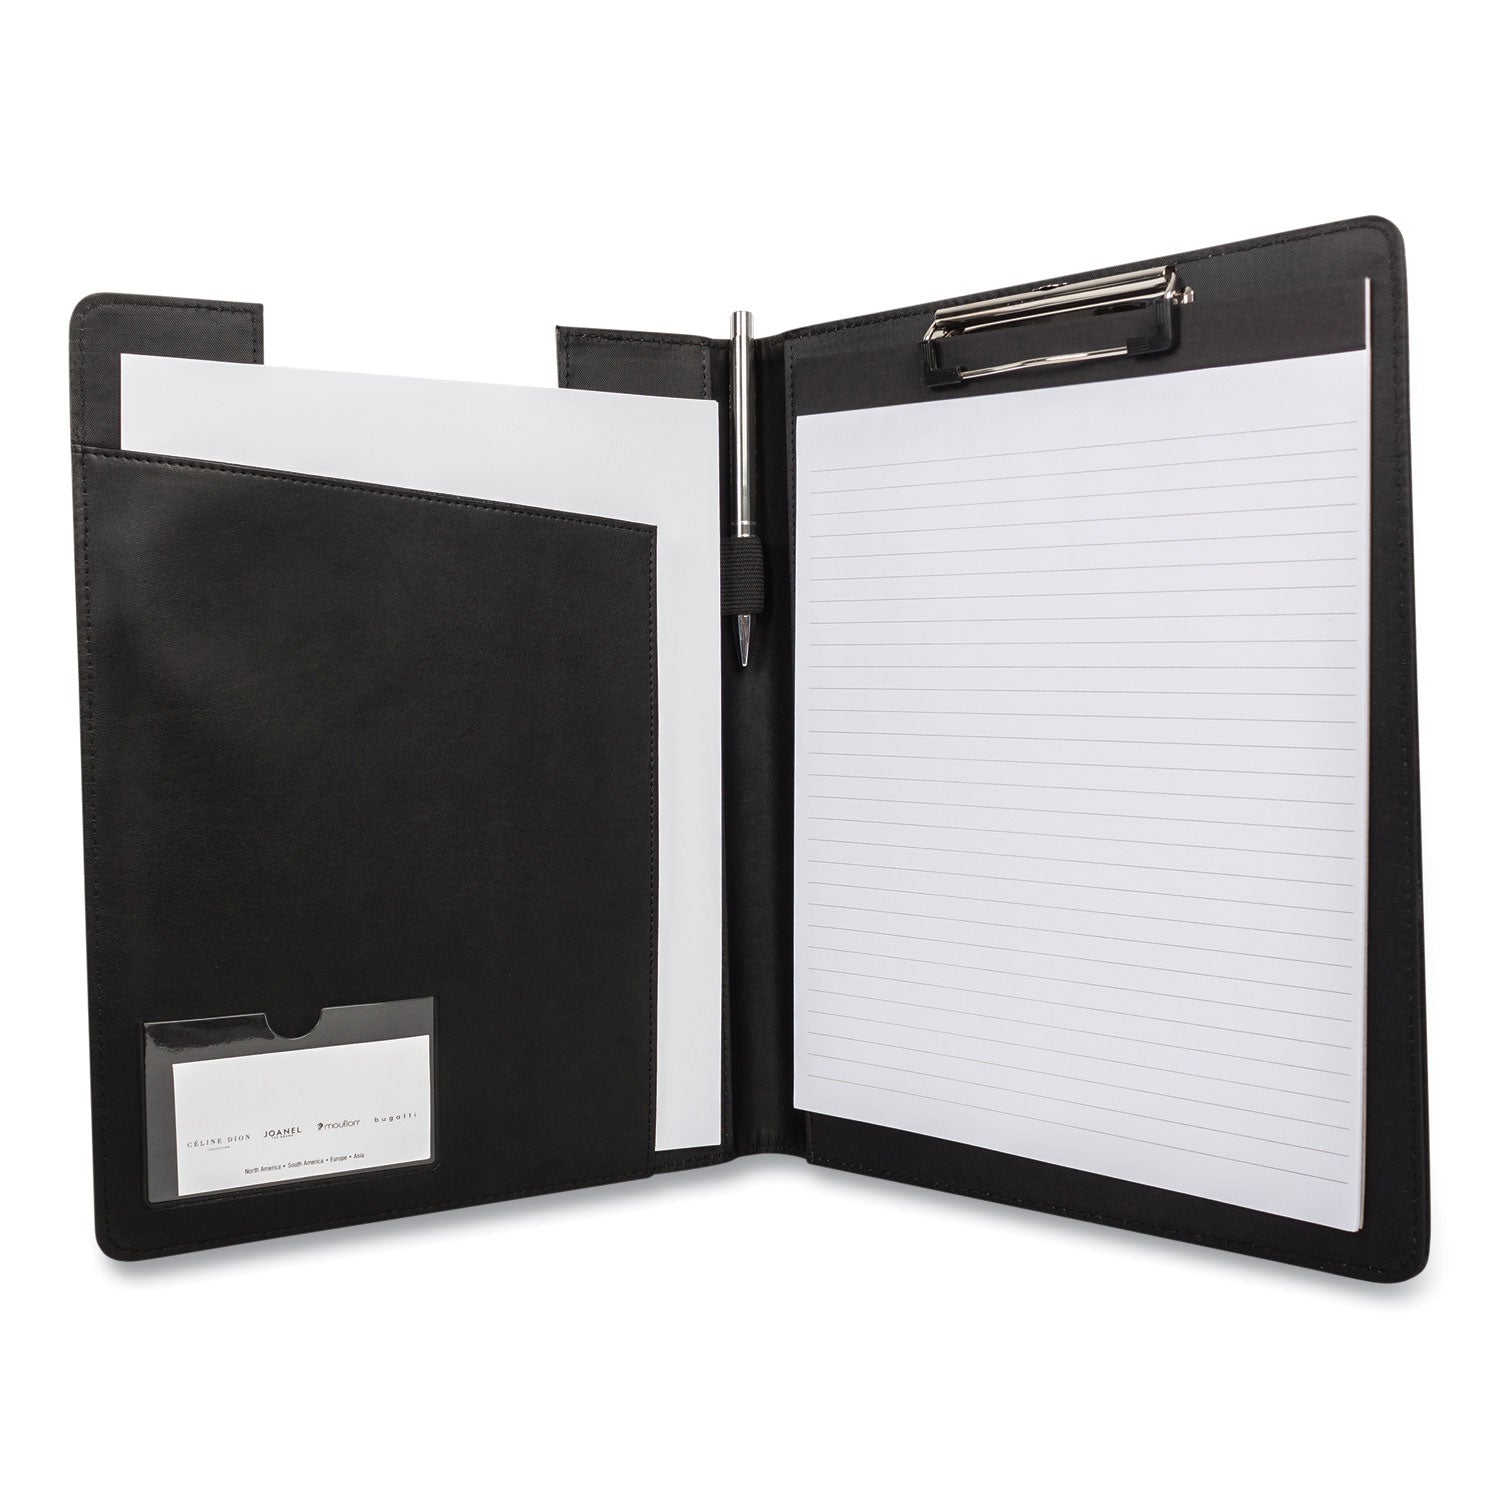 faux-leather-padfolio-notched-front-cover-with-clipboard-fastener-9-x-12-pad-975-x-125-black_bnd5041bsblack - 3